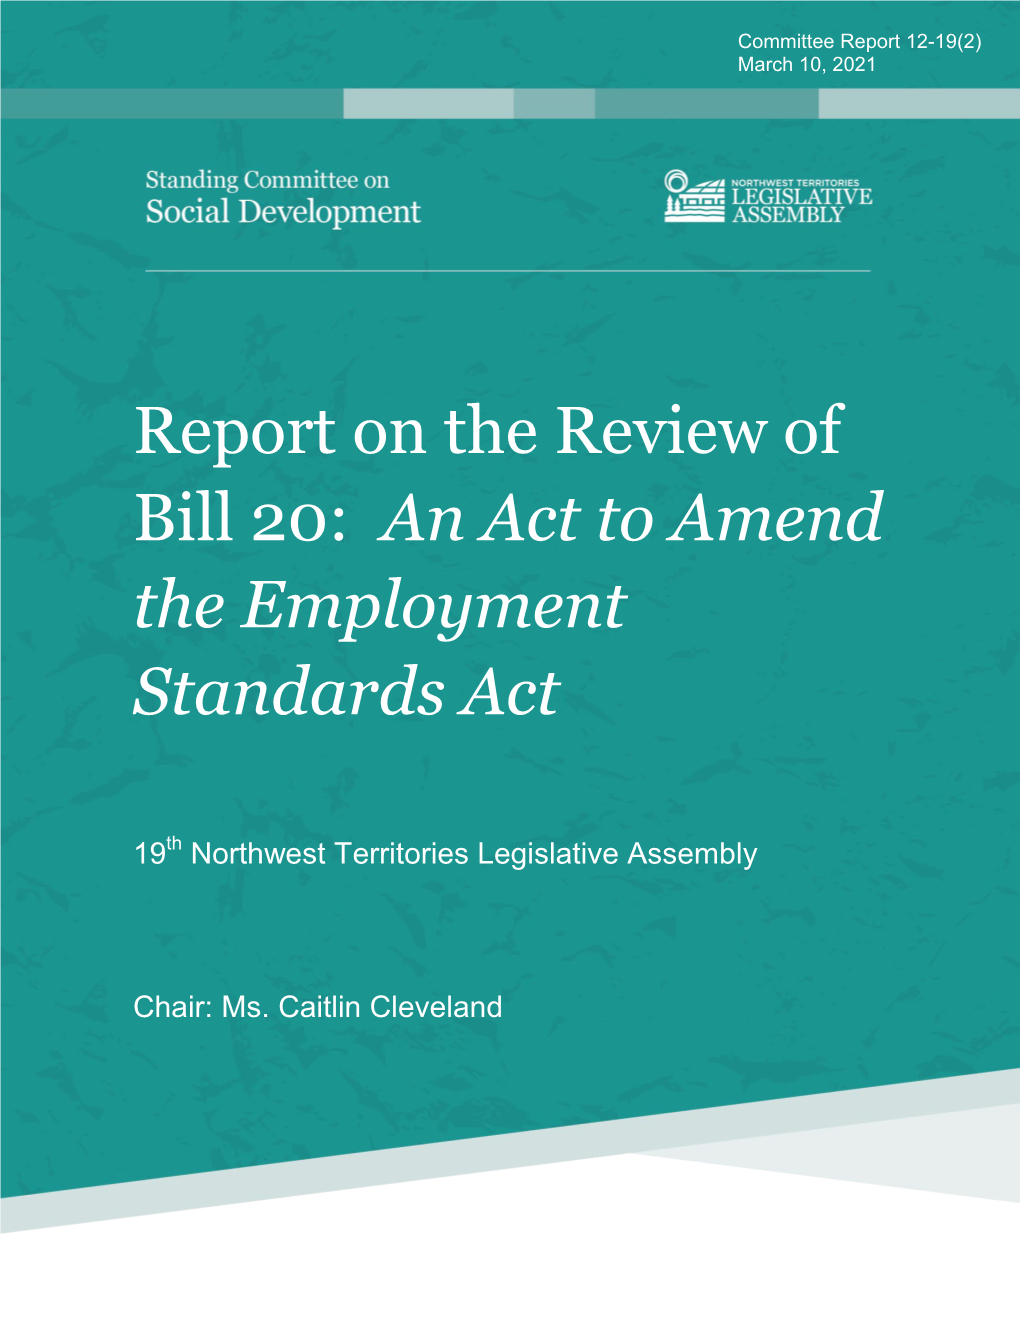 Report on the Review of Bill 20: an Act to Amend the Employment Standards Act